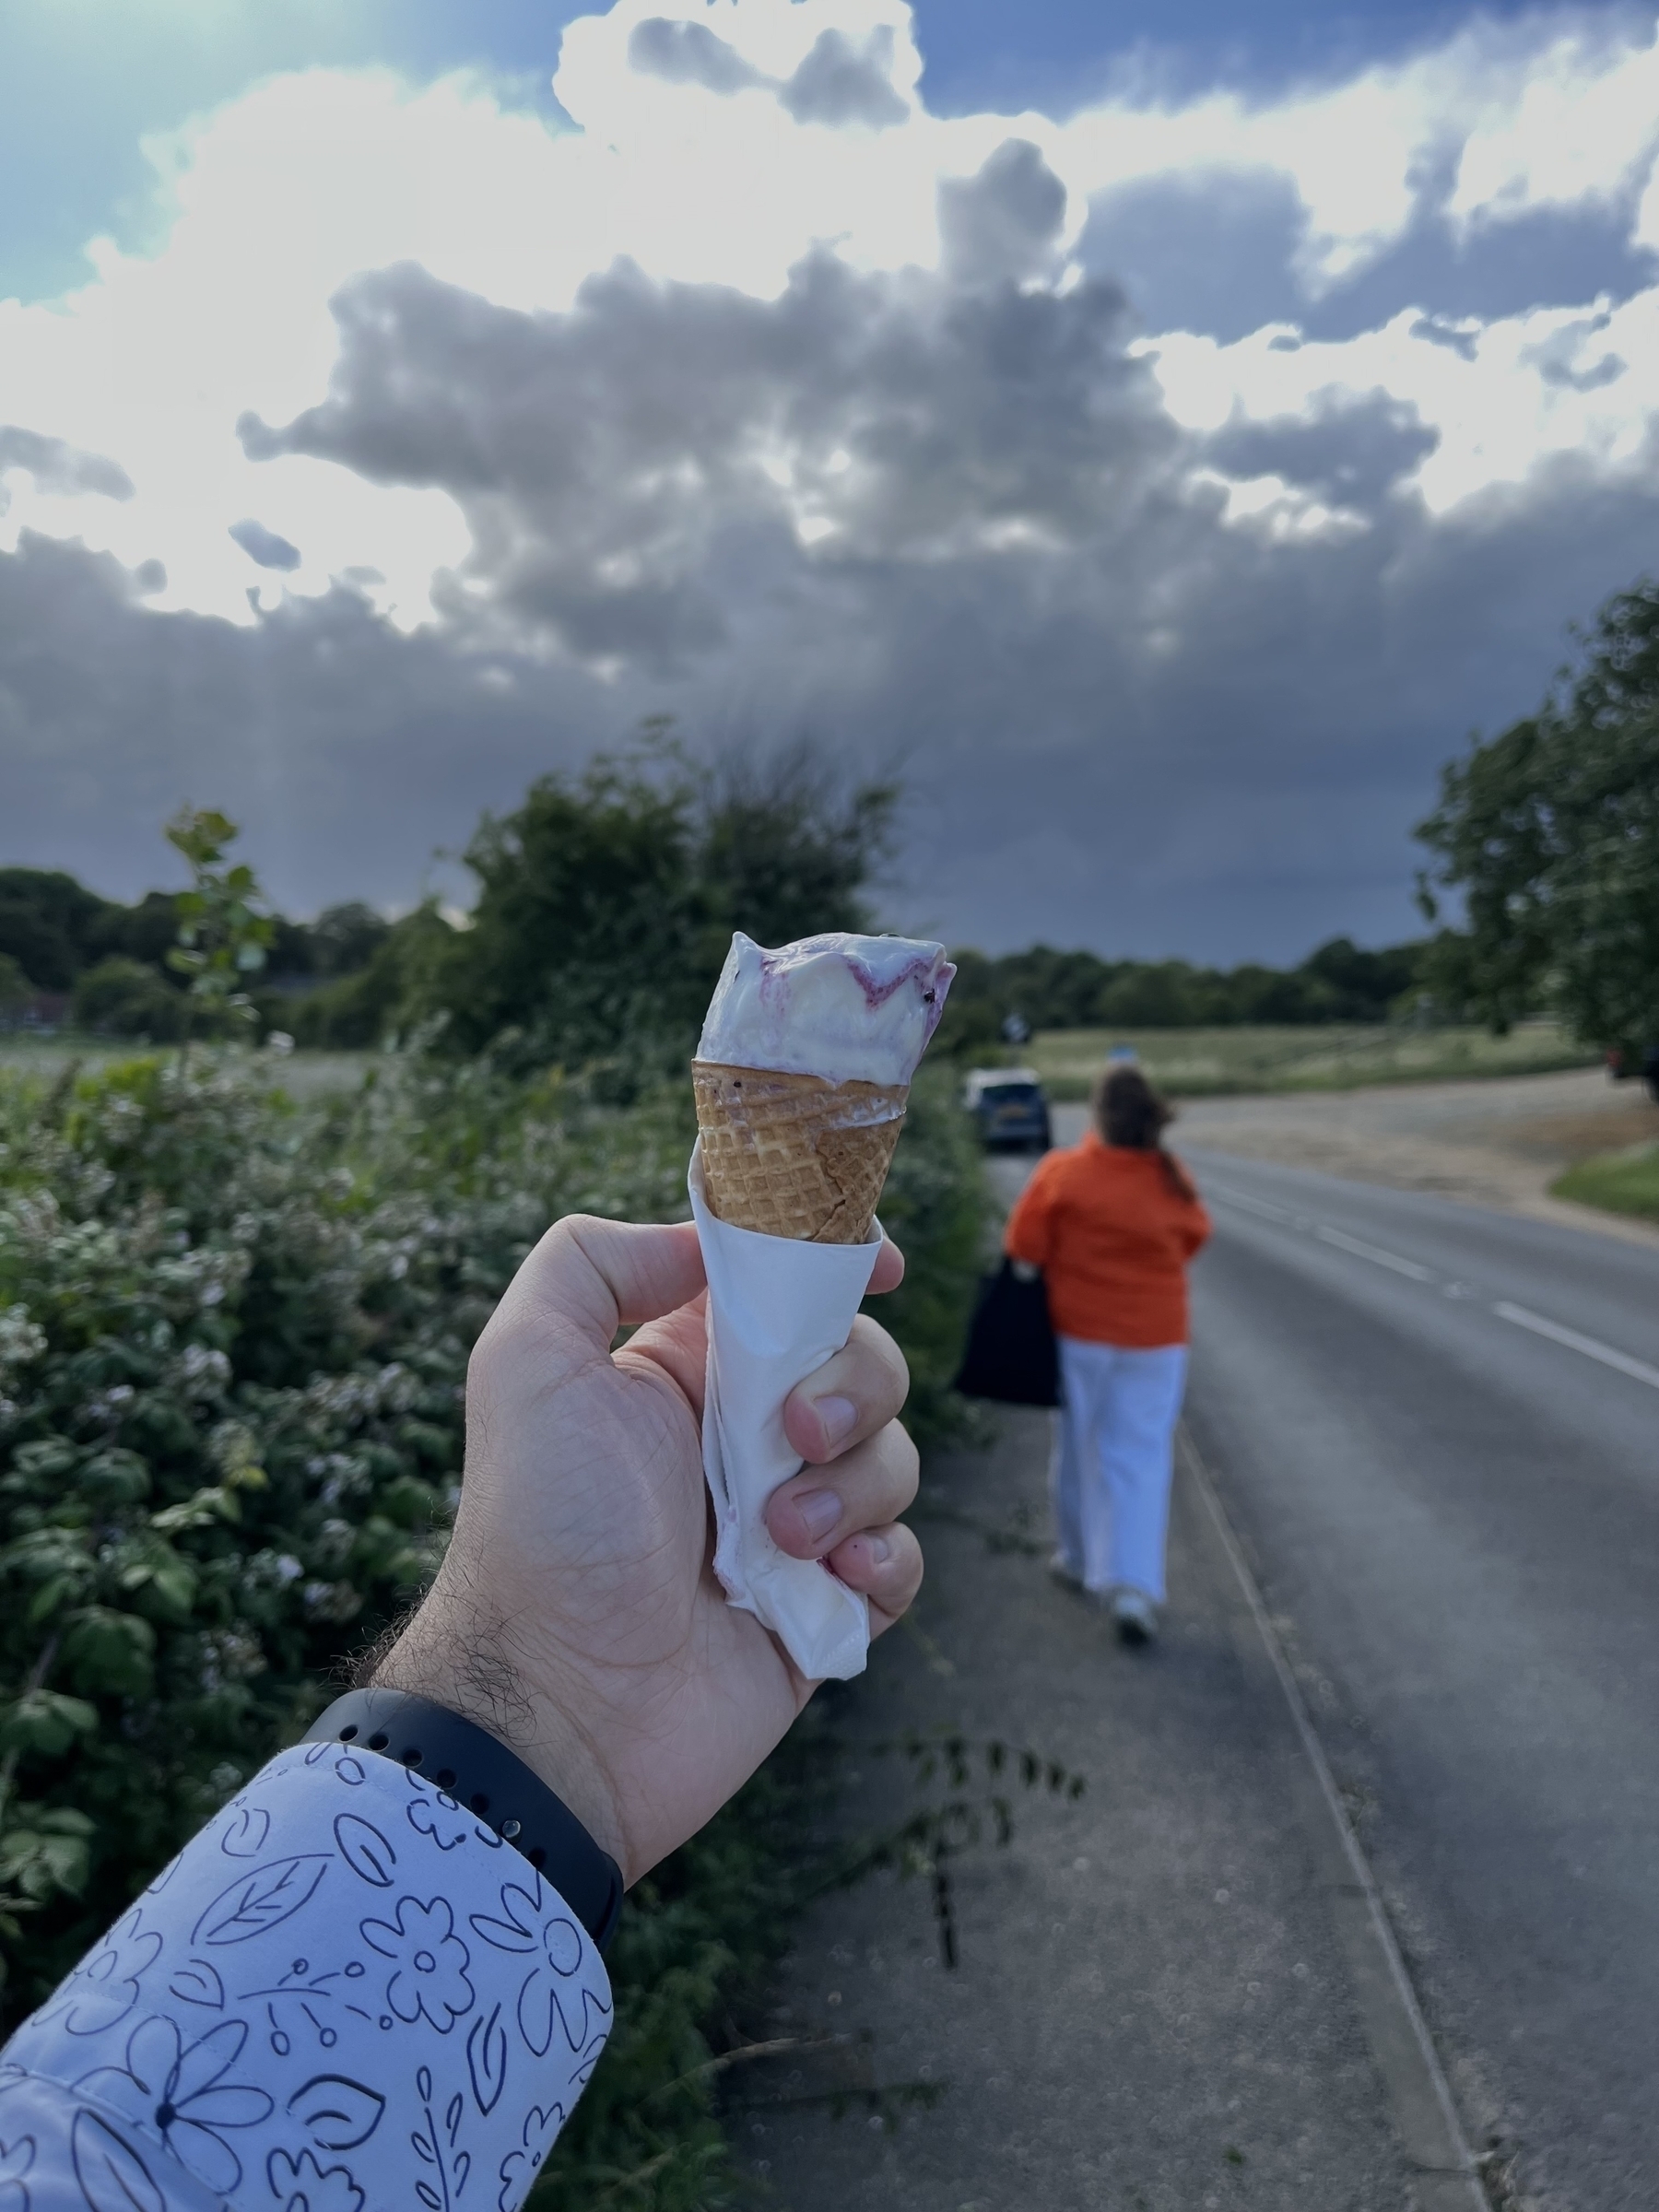 Ice cream on my hand looking at a road with greenery on the sides